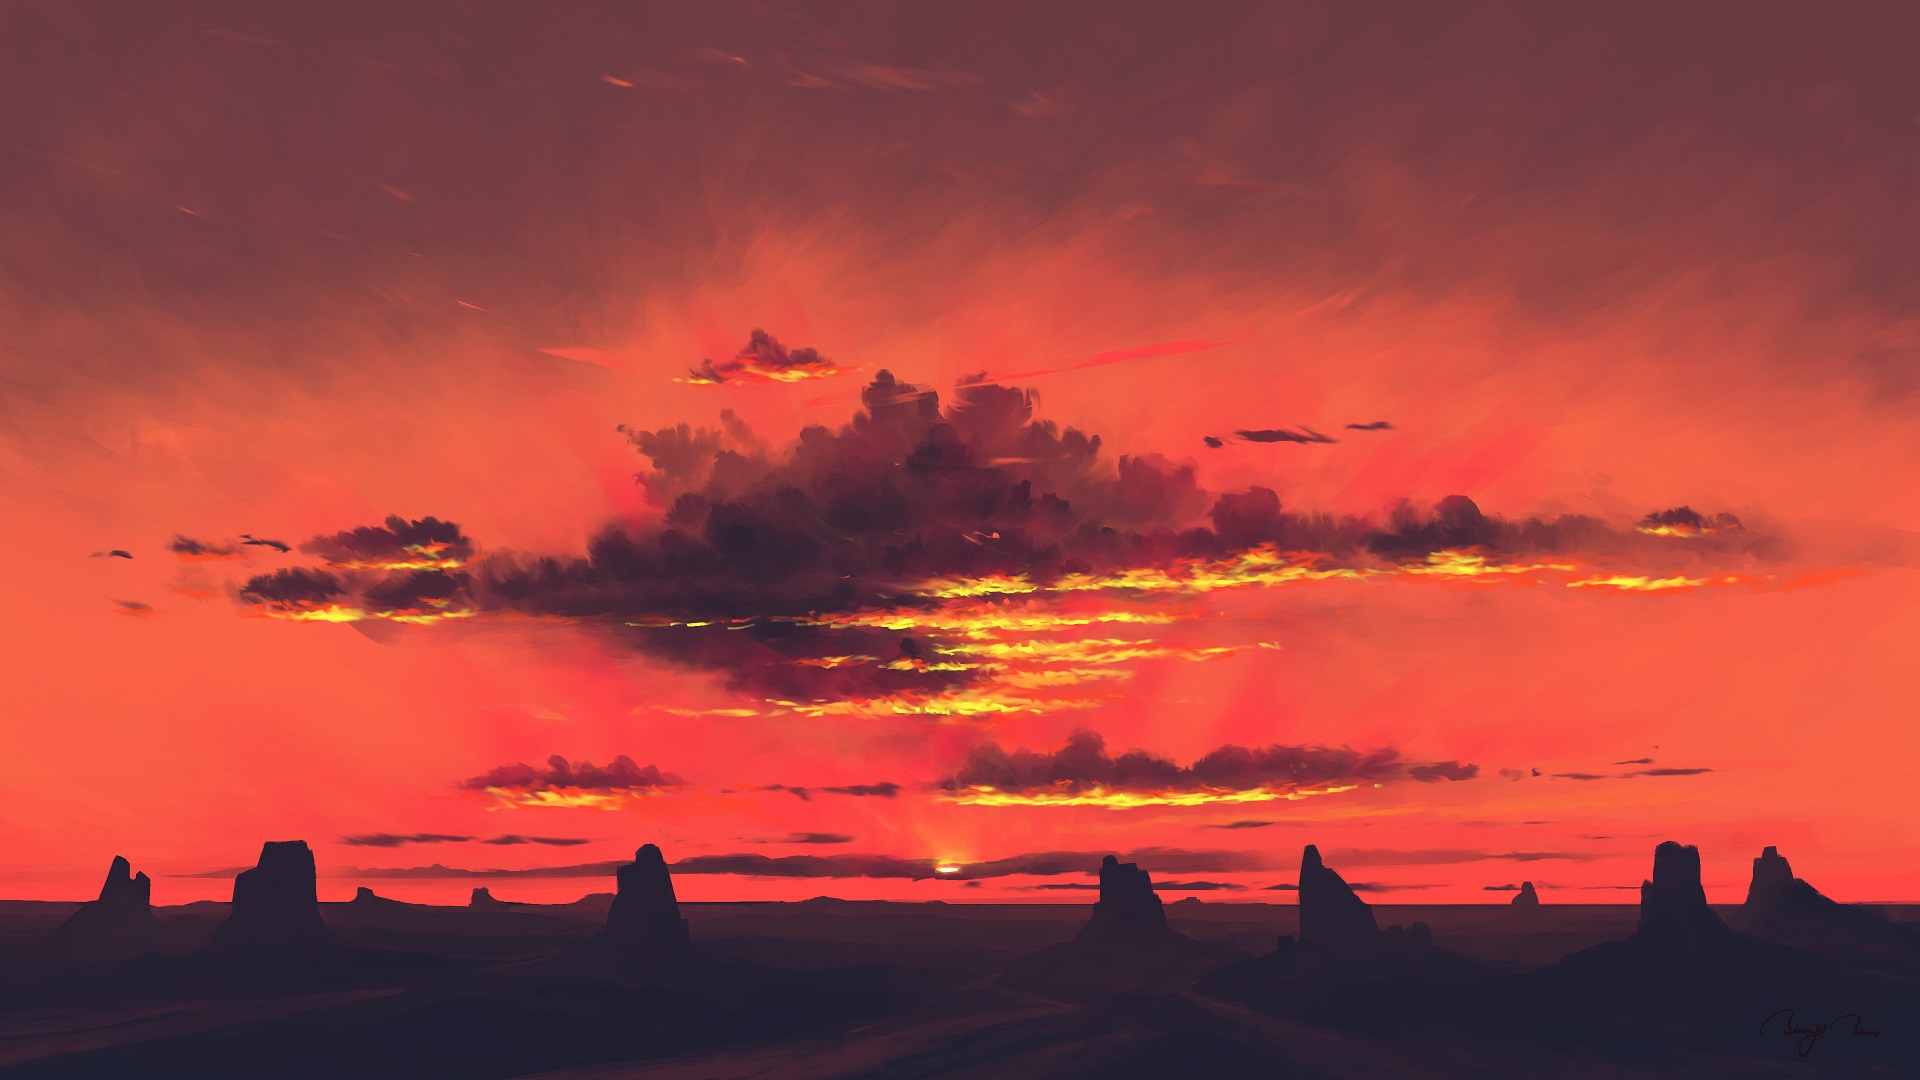 Digital Painting Landscape Sunset Clouds Red Sky BisBiswas 1920x1080